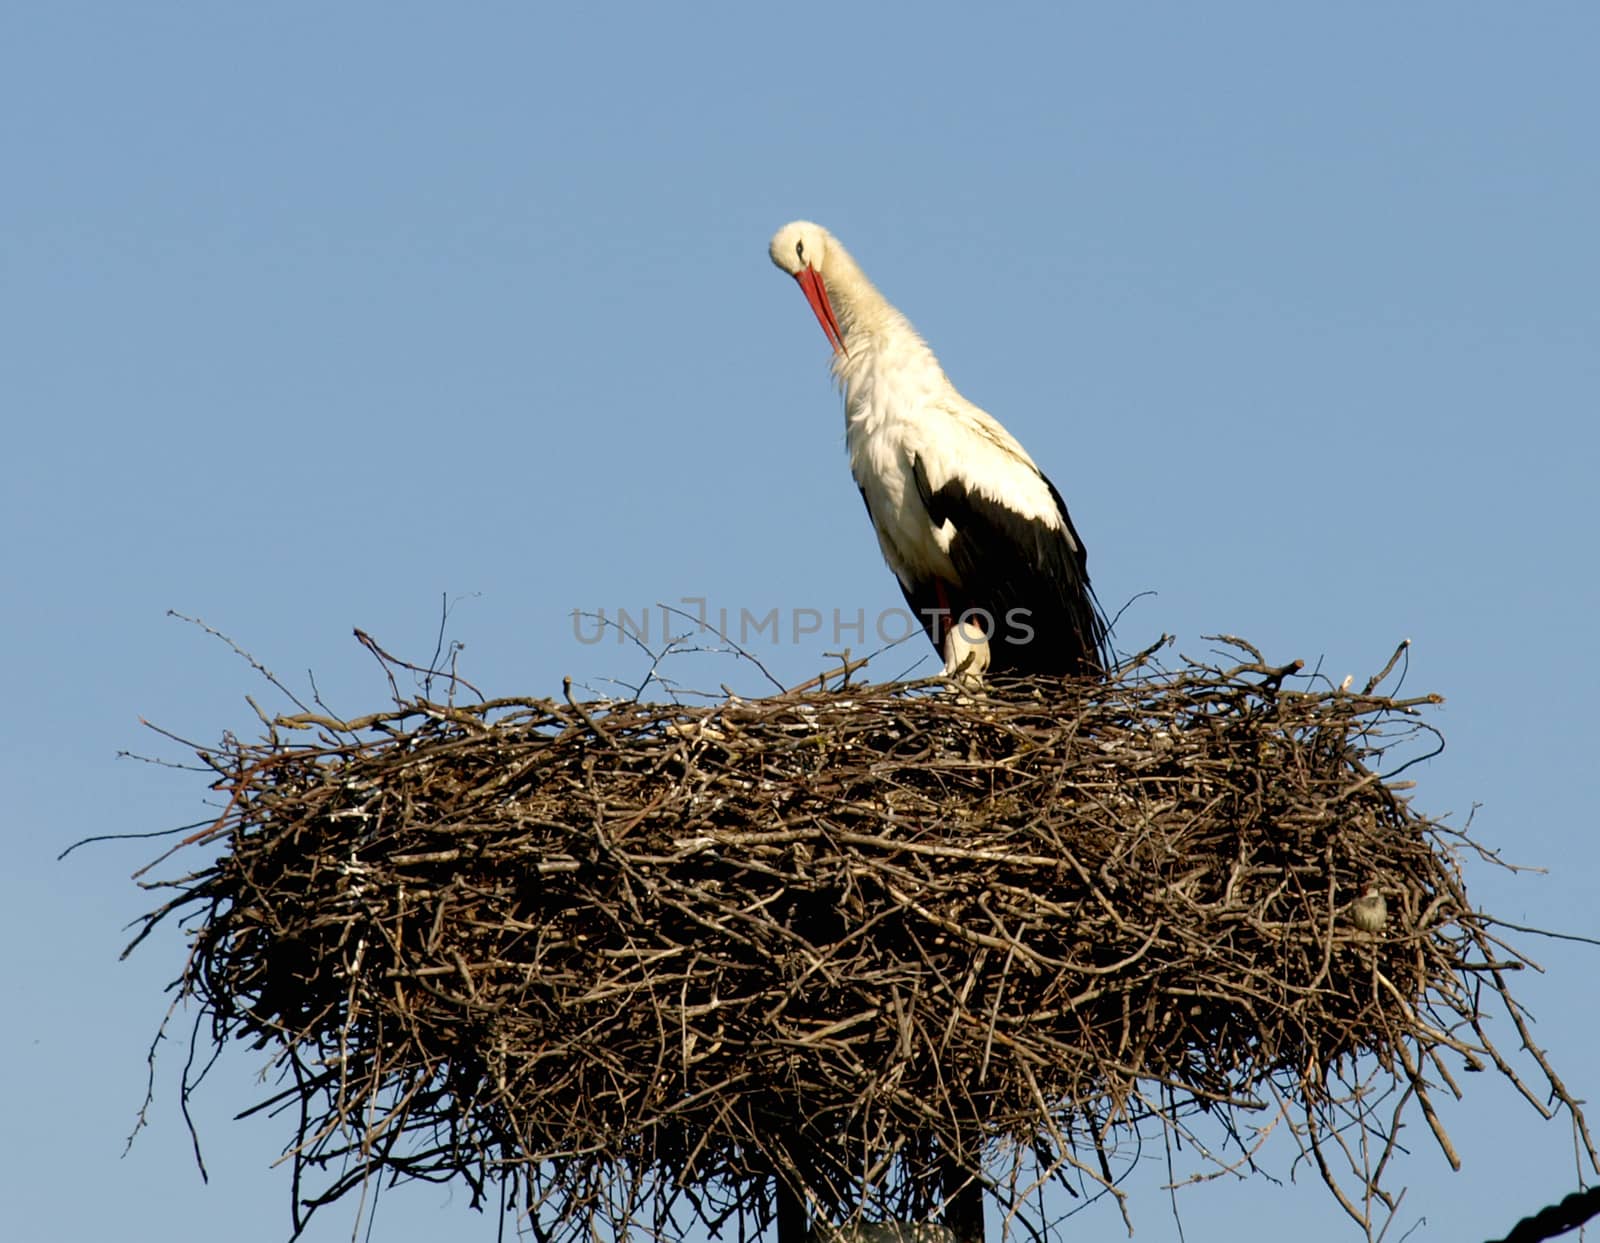 stork in the nest by pm29